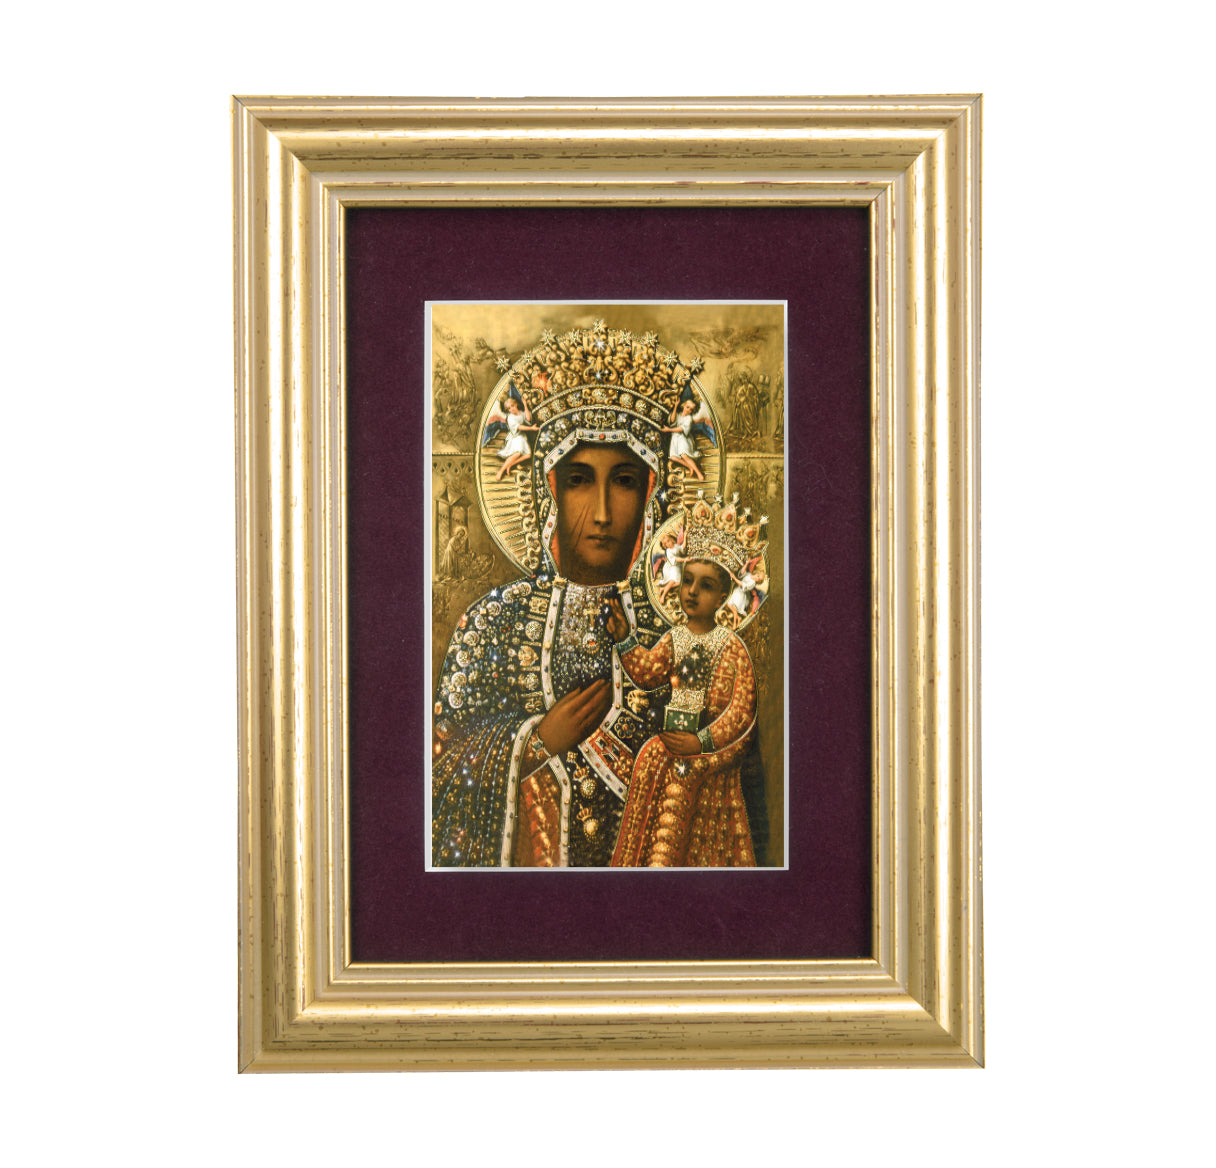 Our Lady of Czestochowa Framed Art with Maroon Velvet Matting